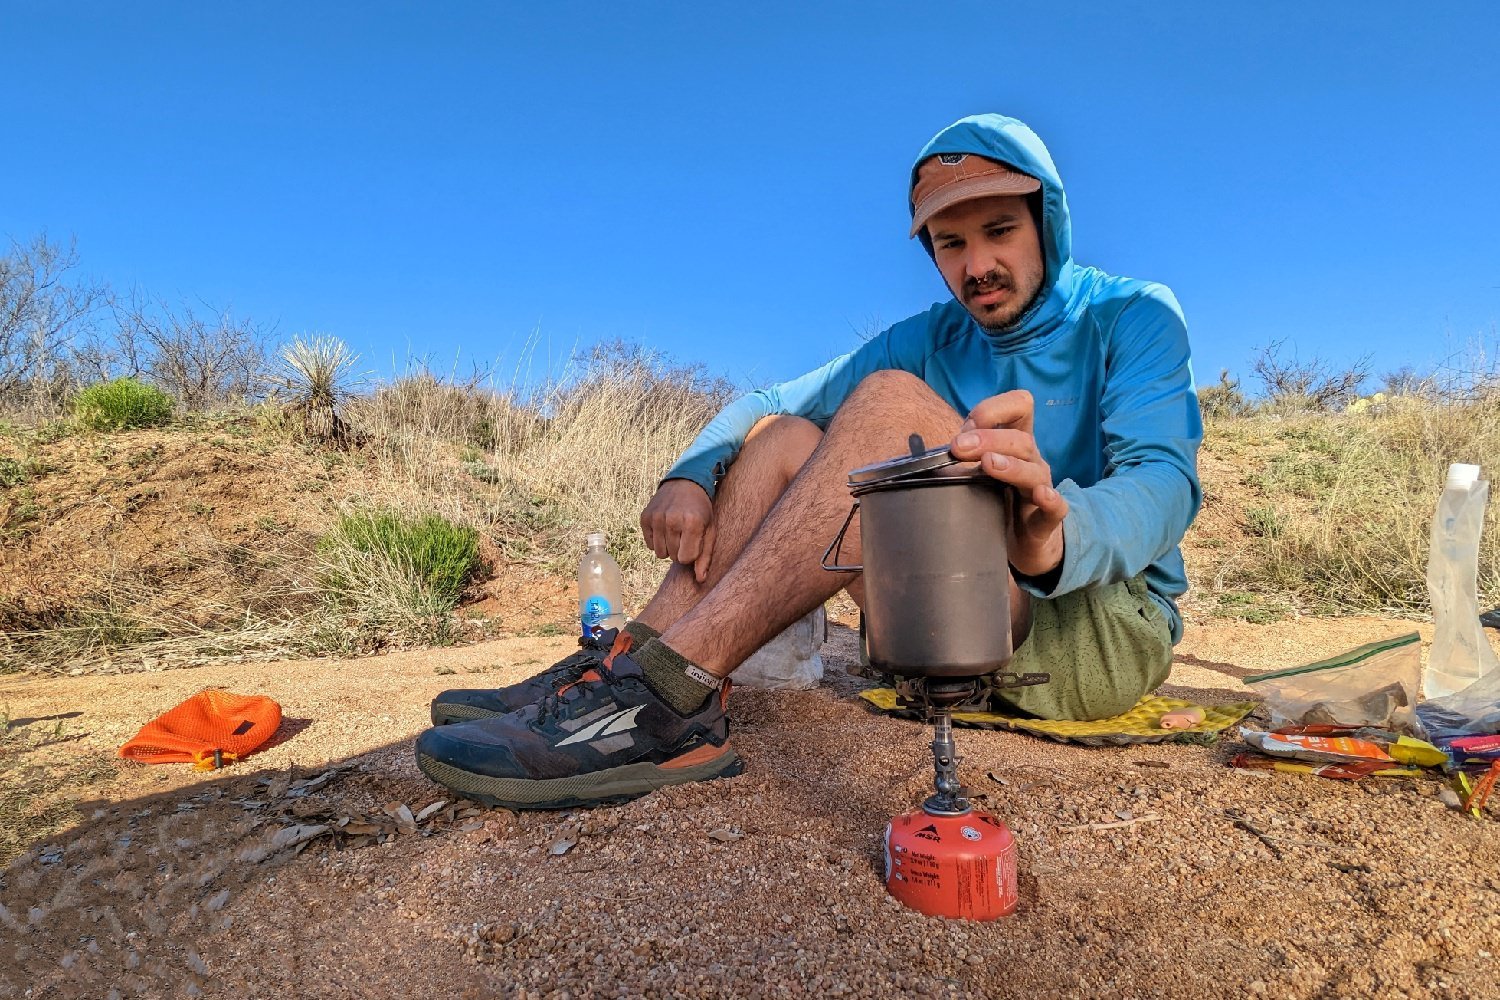 A hiker looking inside a pot that's sitting on the SOTO Windmaster stove - its a desert scene with dried grasses and a vivid blue sky